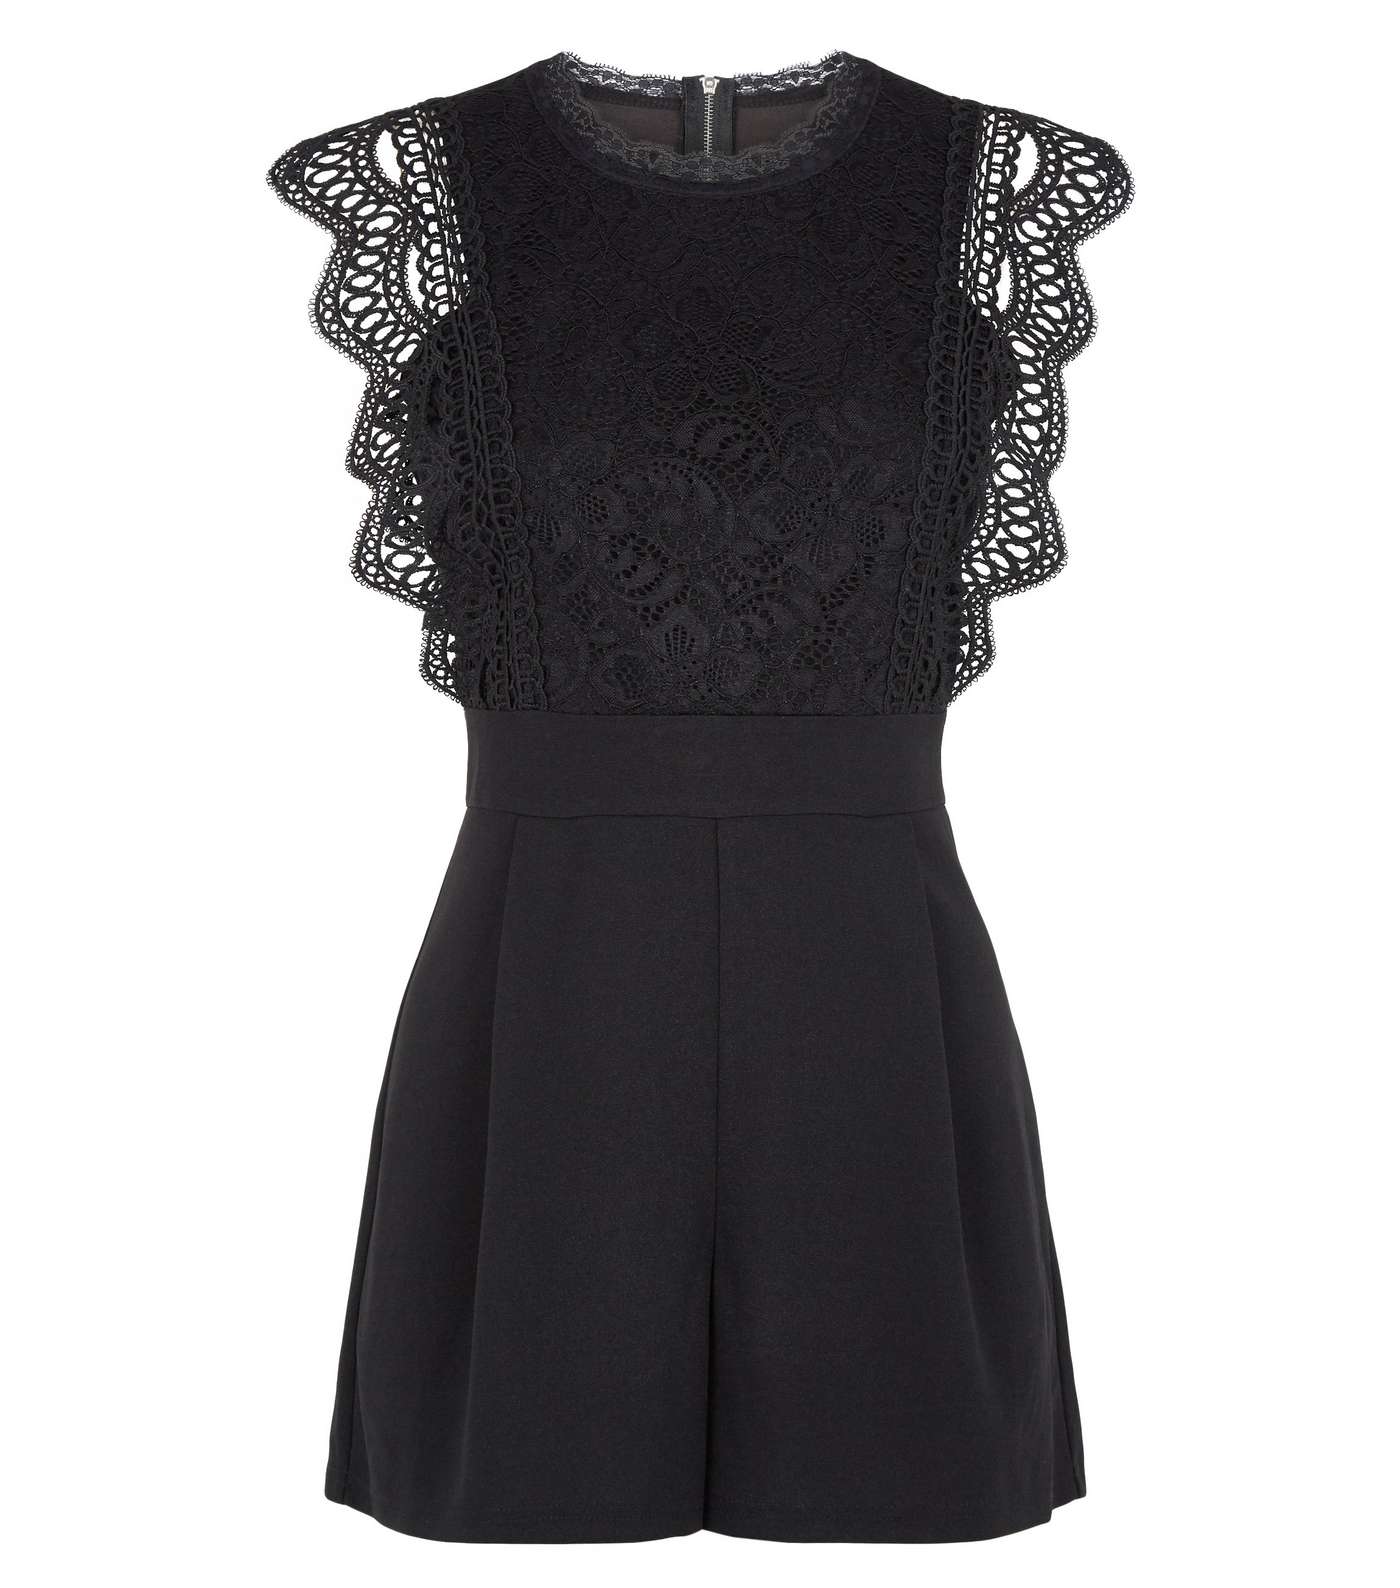 Cameo Rose Black Lace Crochet Sleeve Playsuit Image 4